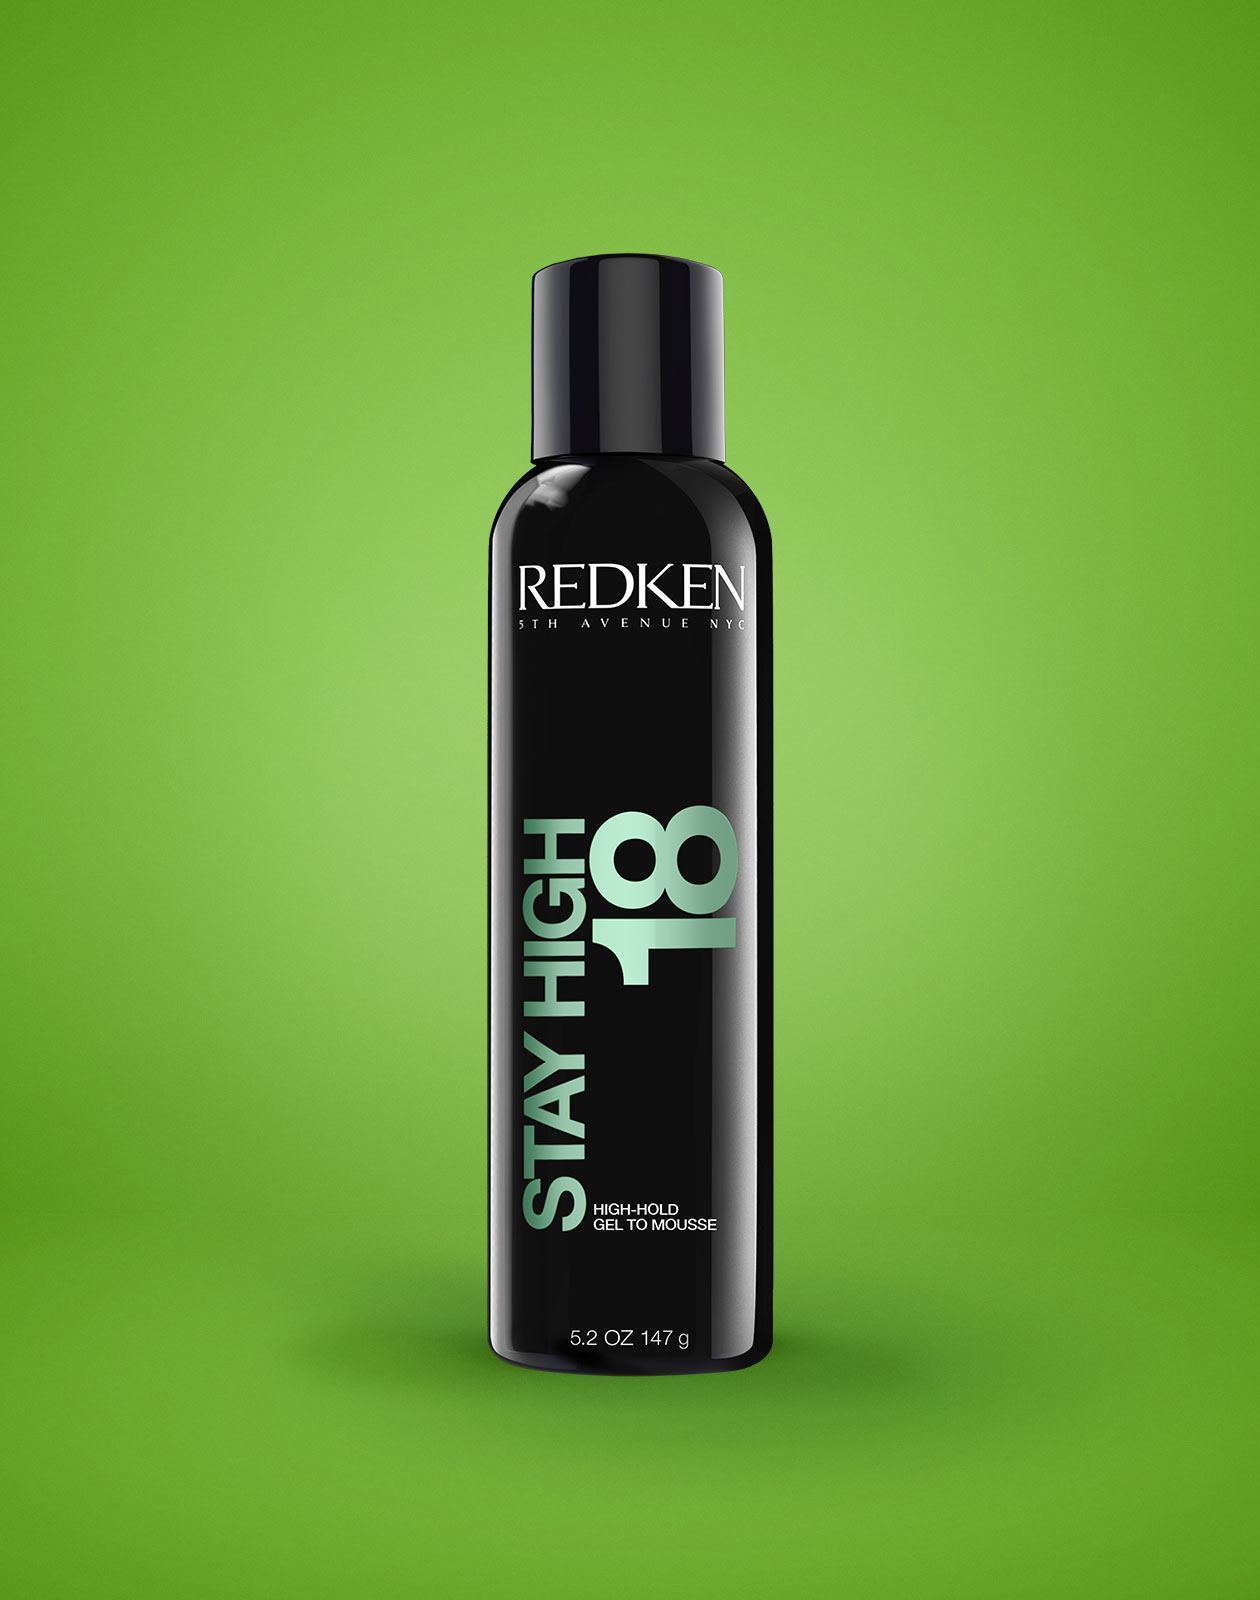 Redken Stay High 18 High-Hold Gel To Mousse | For All Hair Types | Provides Long-Lasting Volume & Body | 5.2 Oz